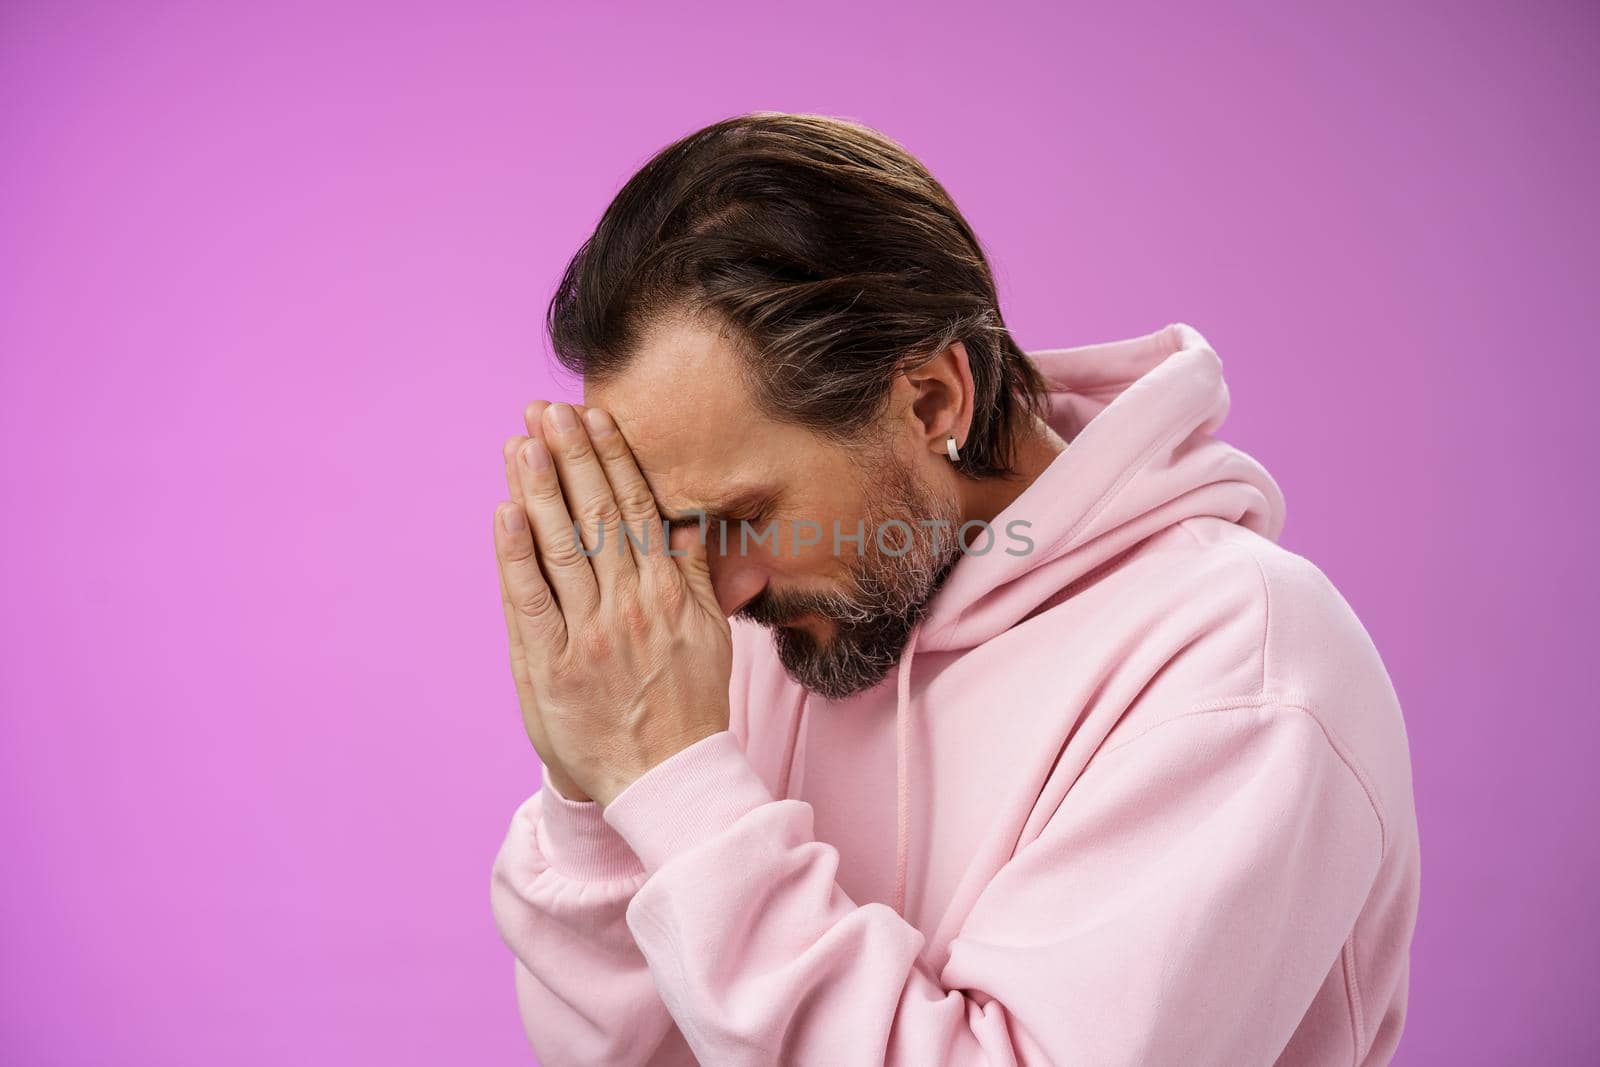 Concerned upset man supplicating asking god mercy help praying bow head close eyes hold hands pray hopefully waiting miracle worried wife health, standing sadness purple background. Copy space